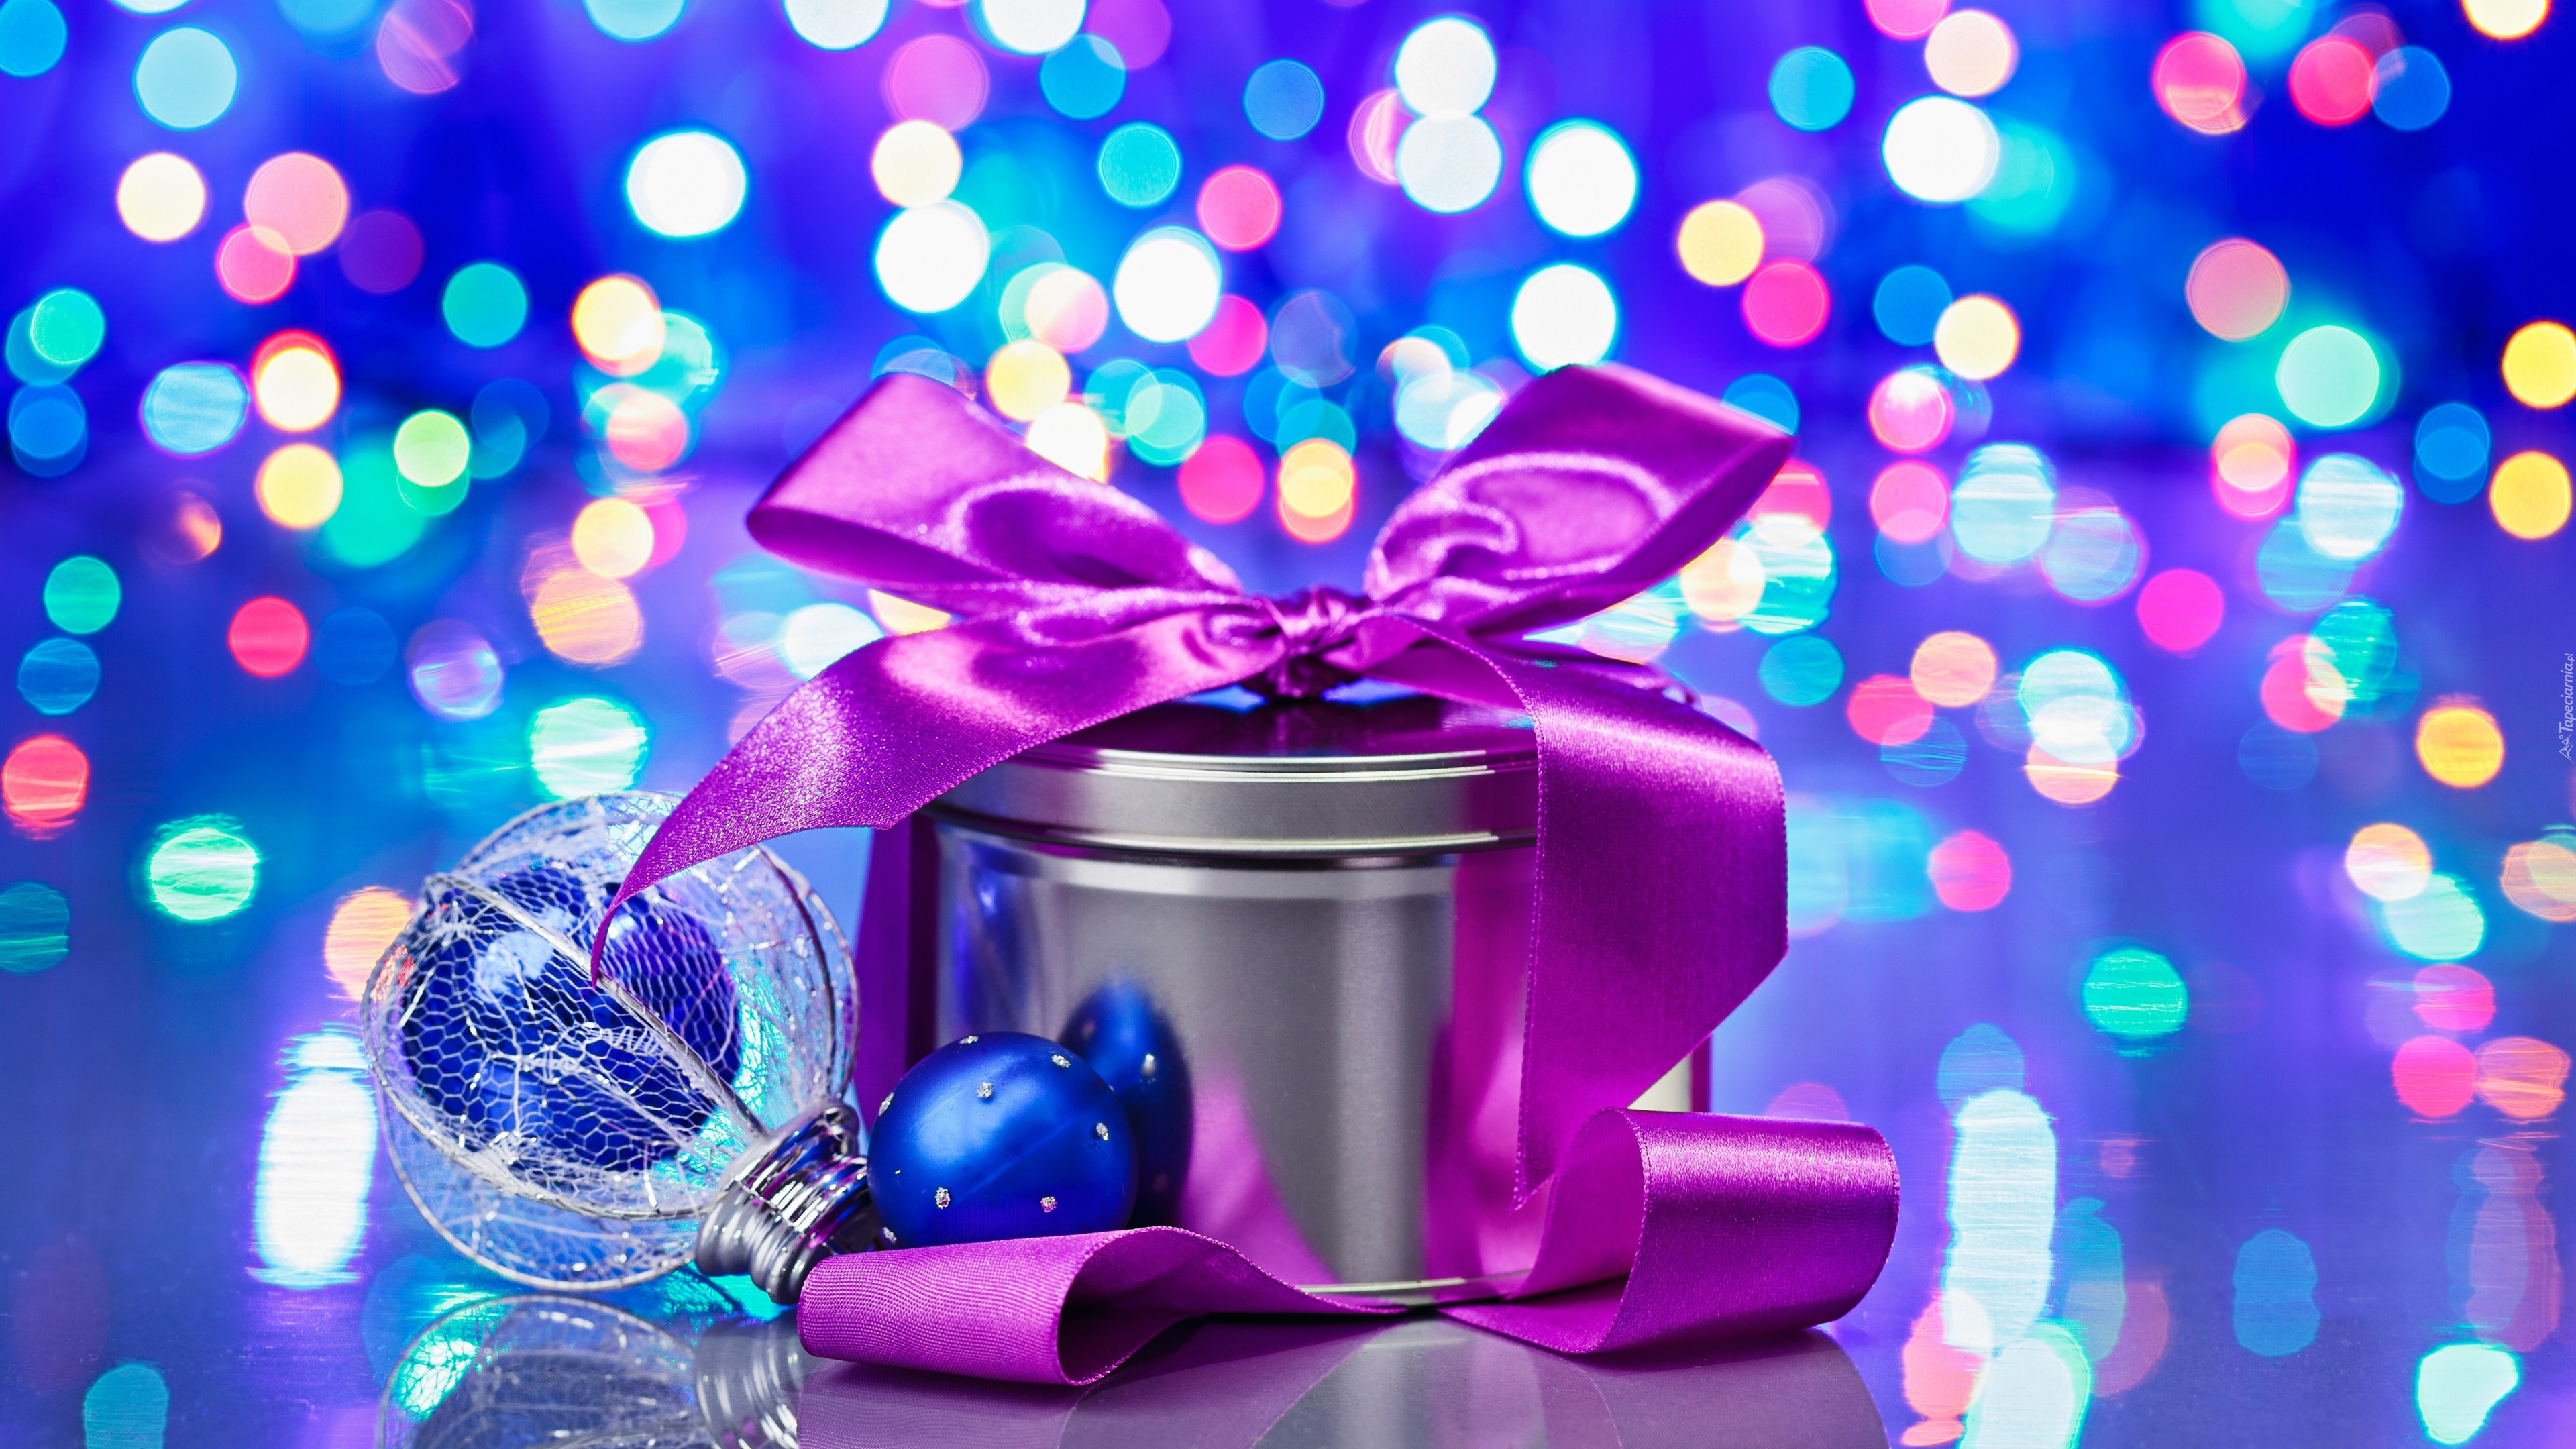 Christmas Day, New Year, Purple, Blue, Violet. Wallpaper in 3840x2160 Resolution